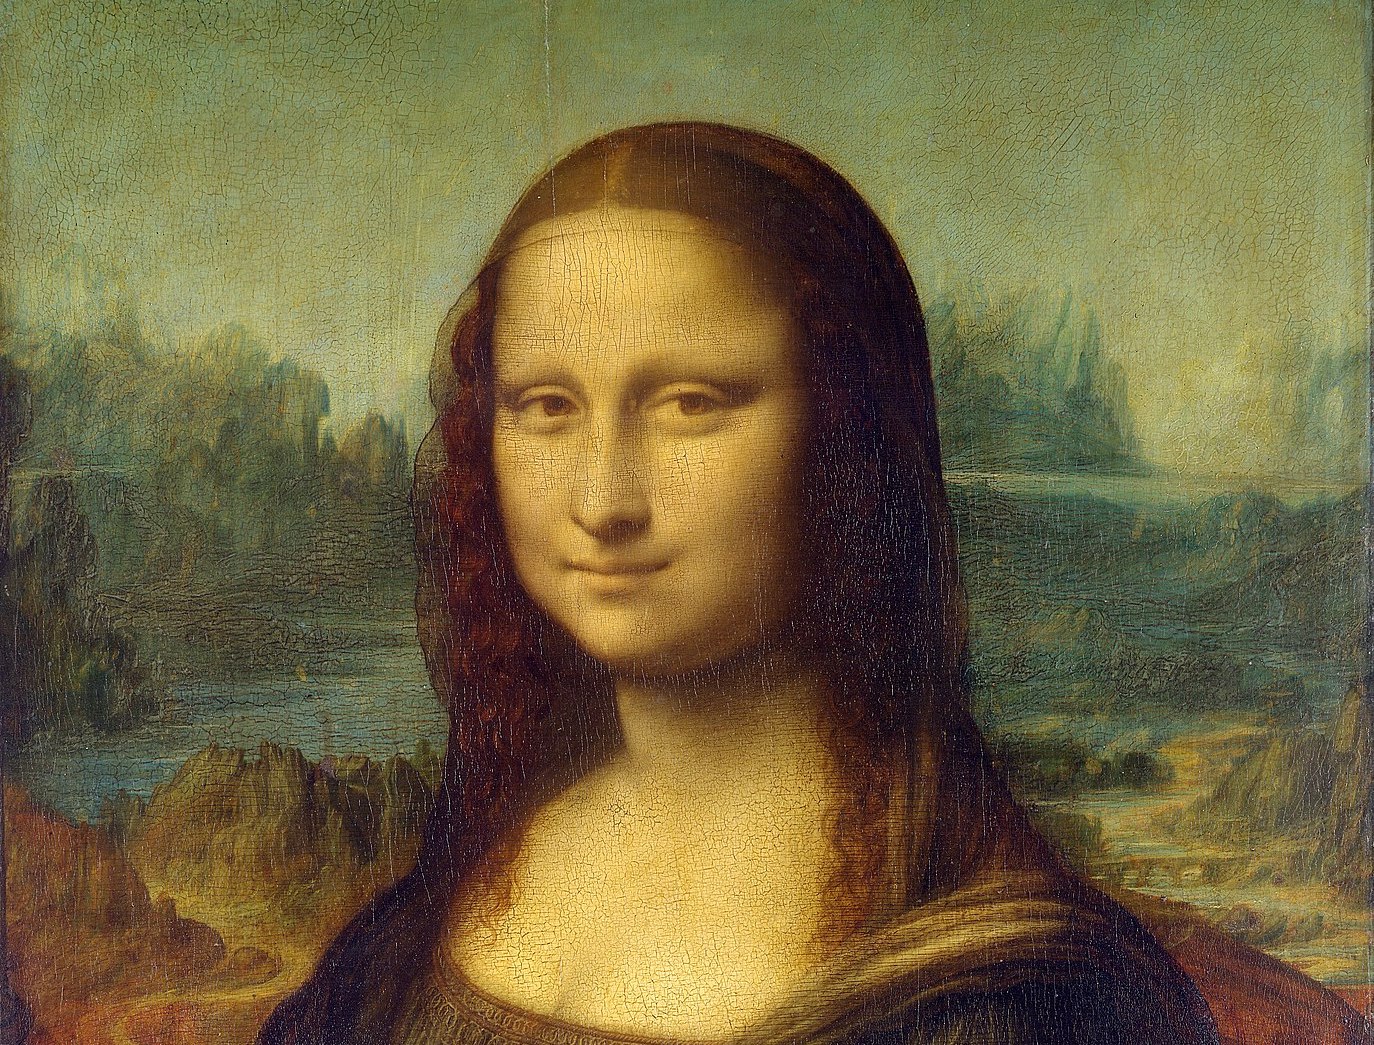 In a painting, a woman is seen from just above her chest. She gazes at the viewer with a mysterious smile, and a deep landscape looms behind her.